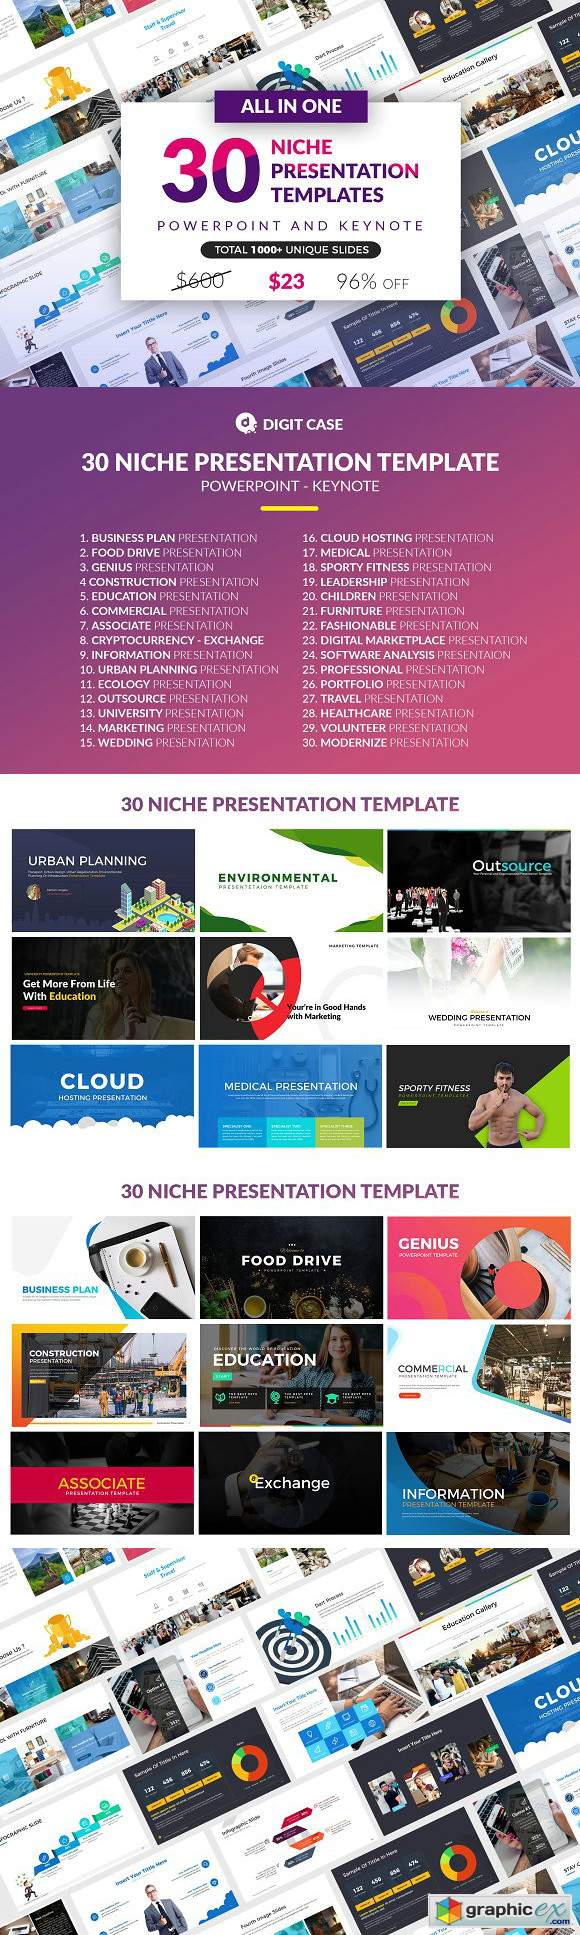 All In One 30 Presentation Template